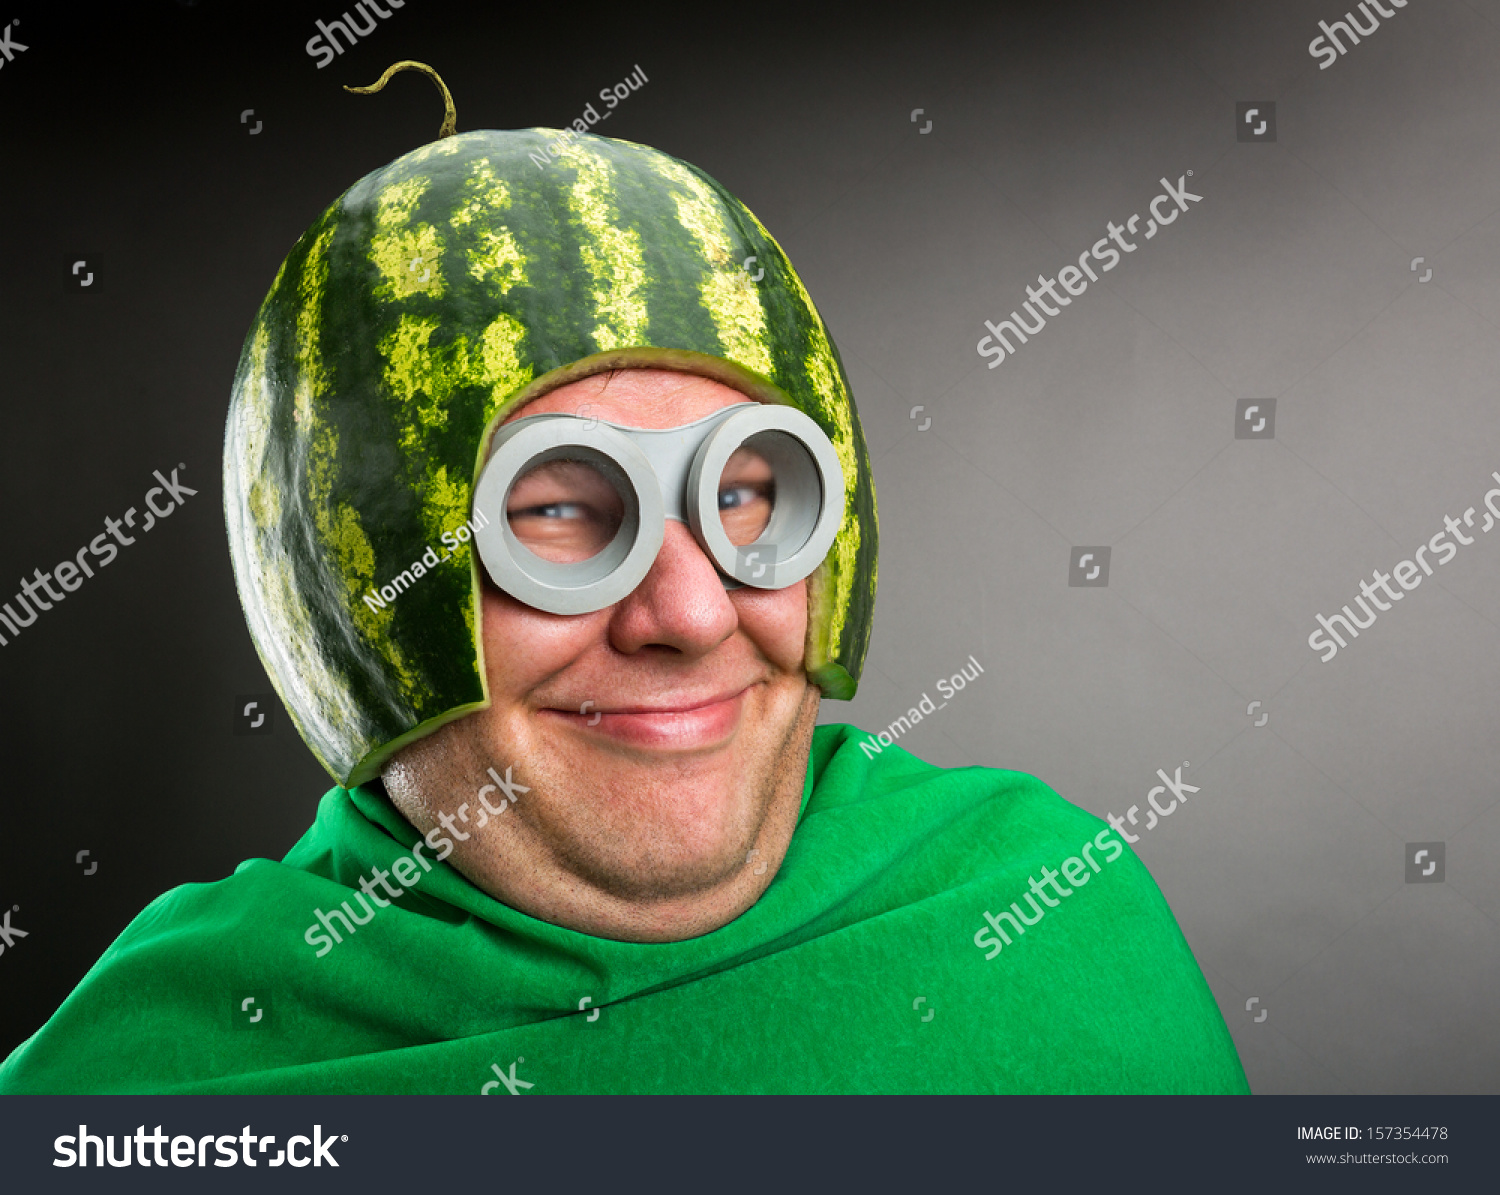 stock-photo-funny-man-with-watermelon-he